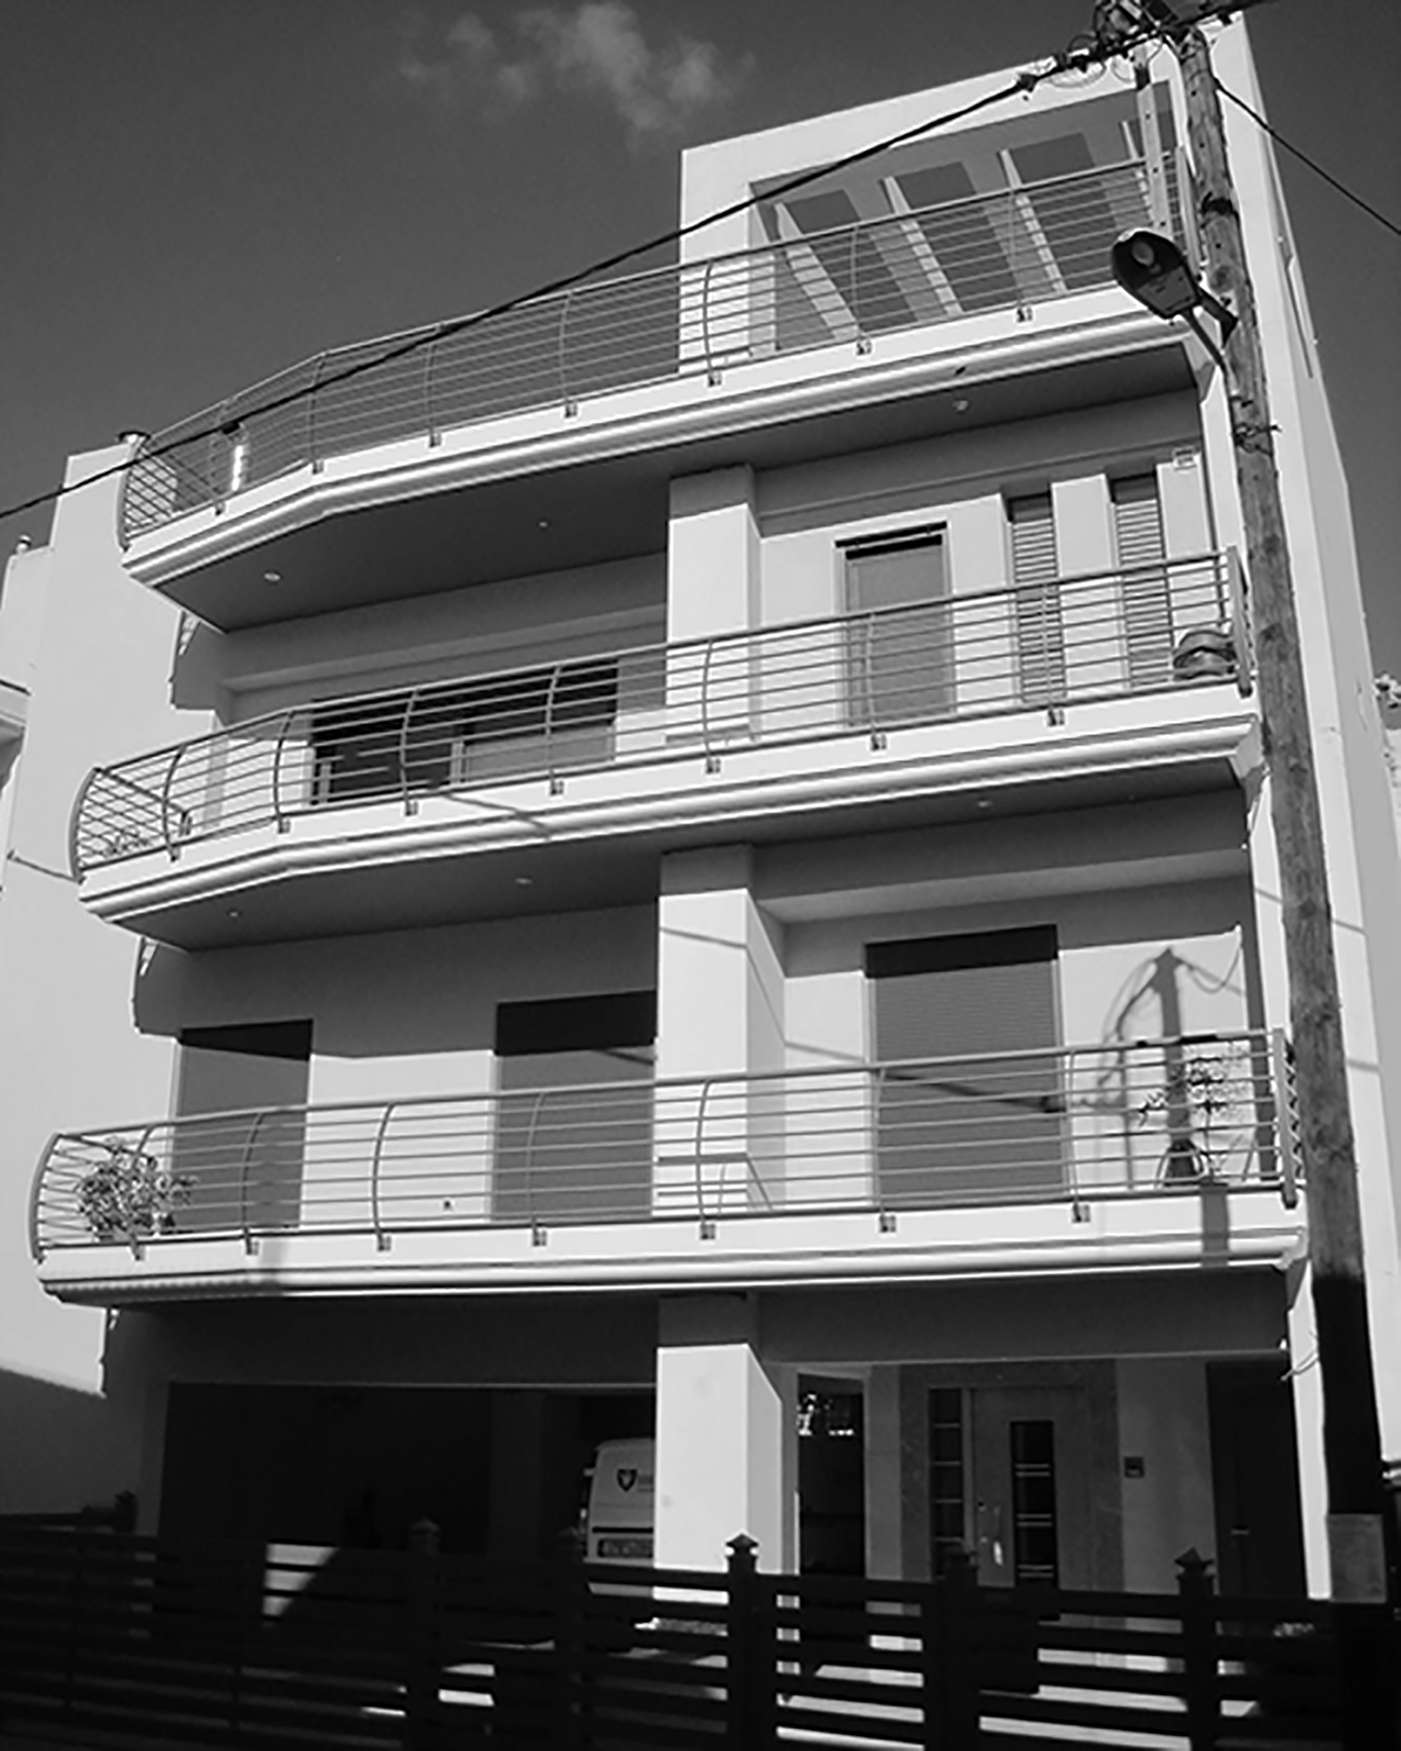 Detached house in Stavroupoli (Thessaloniki, 2011)